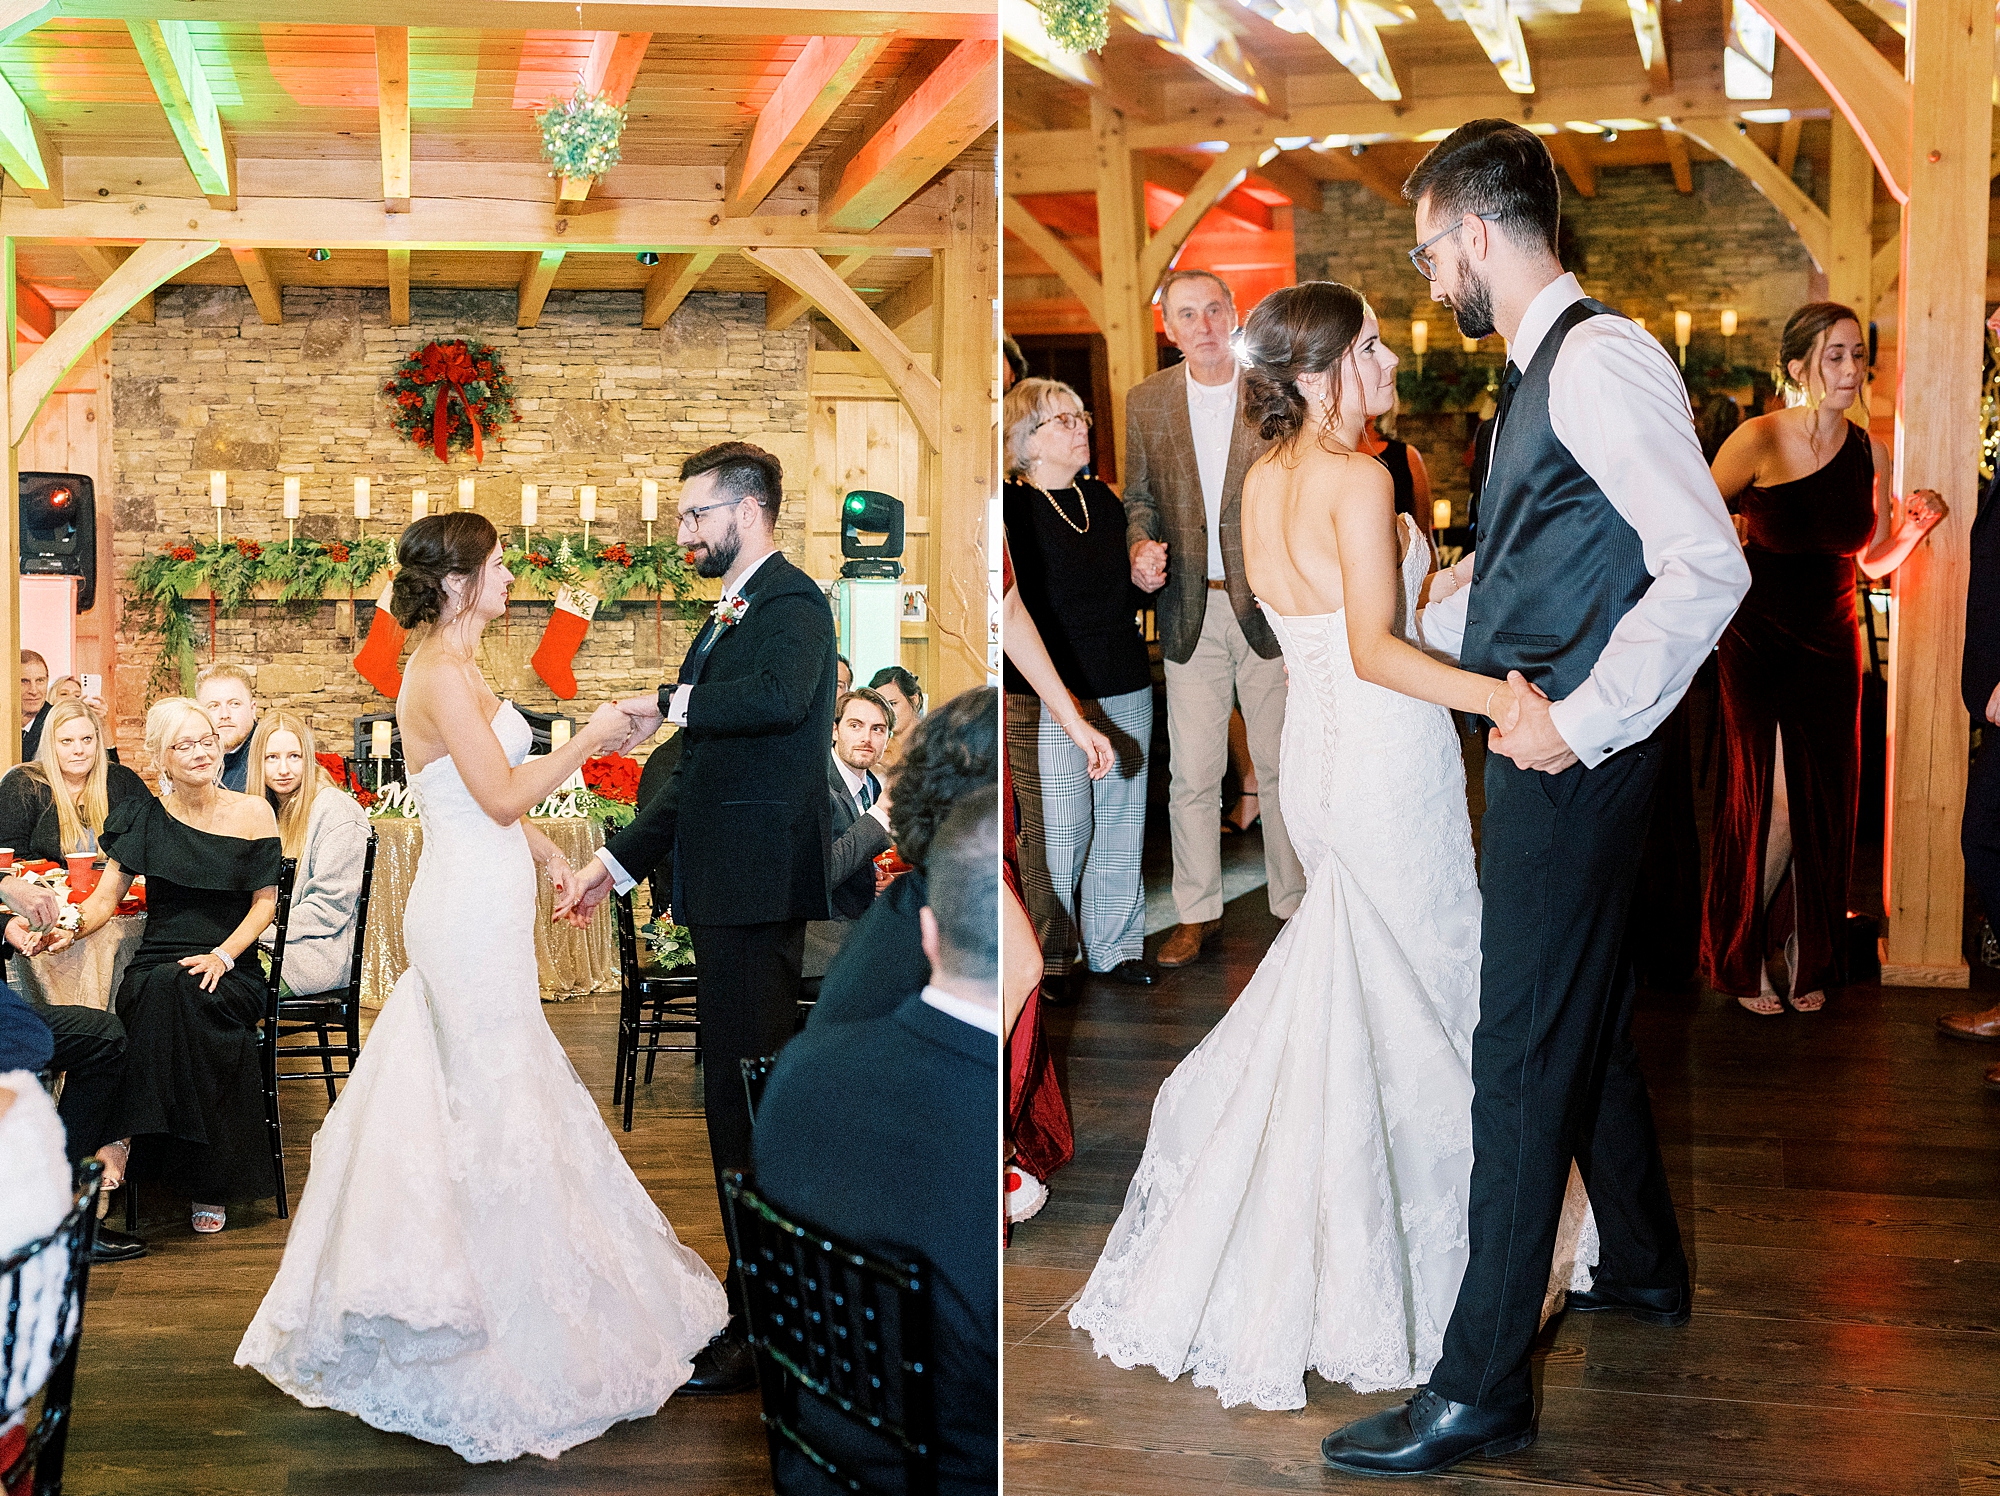 newlyweds dance together in barn at Chickadee Hill Farms